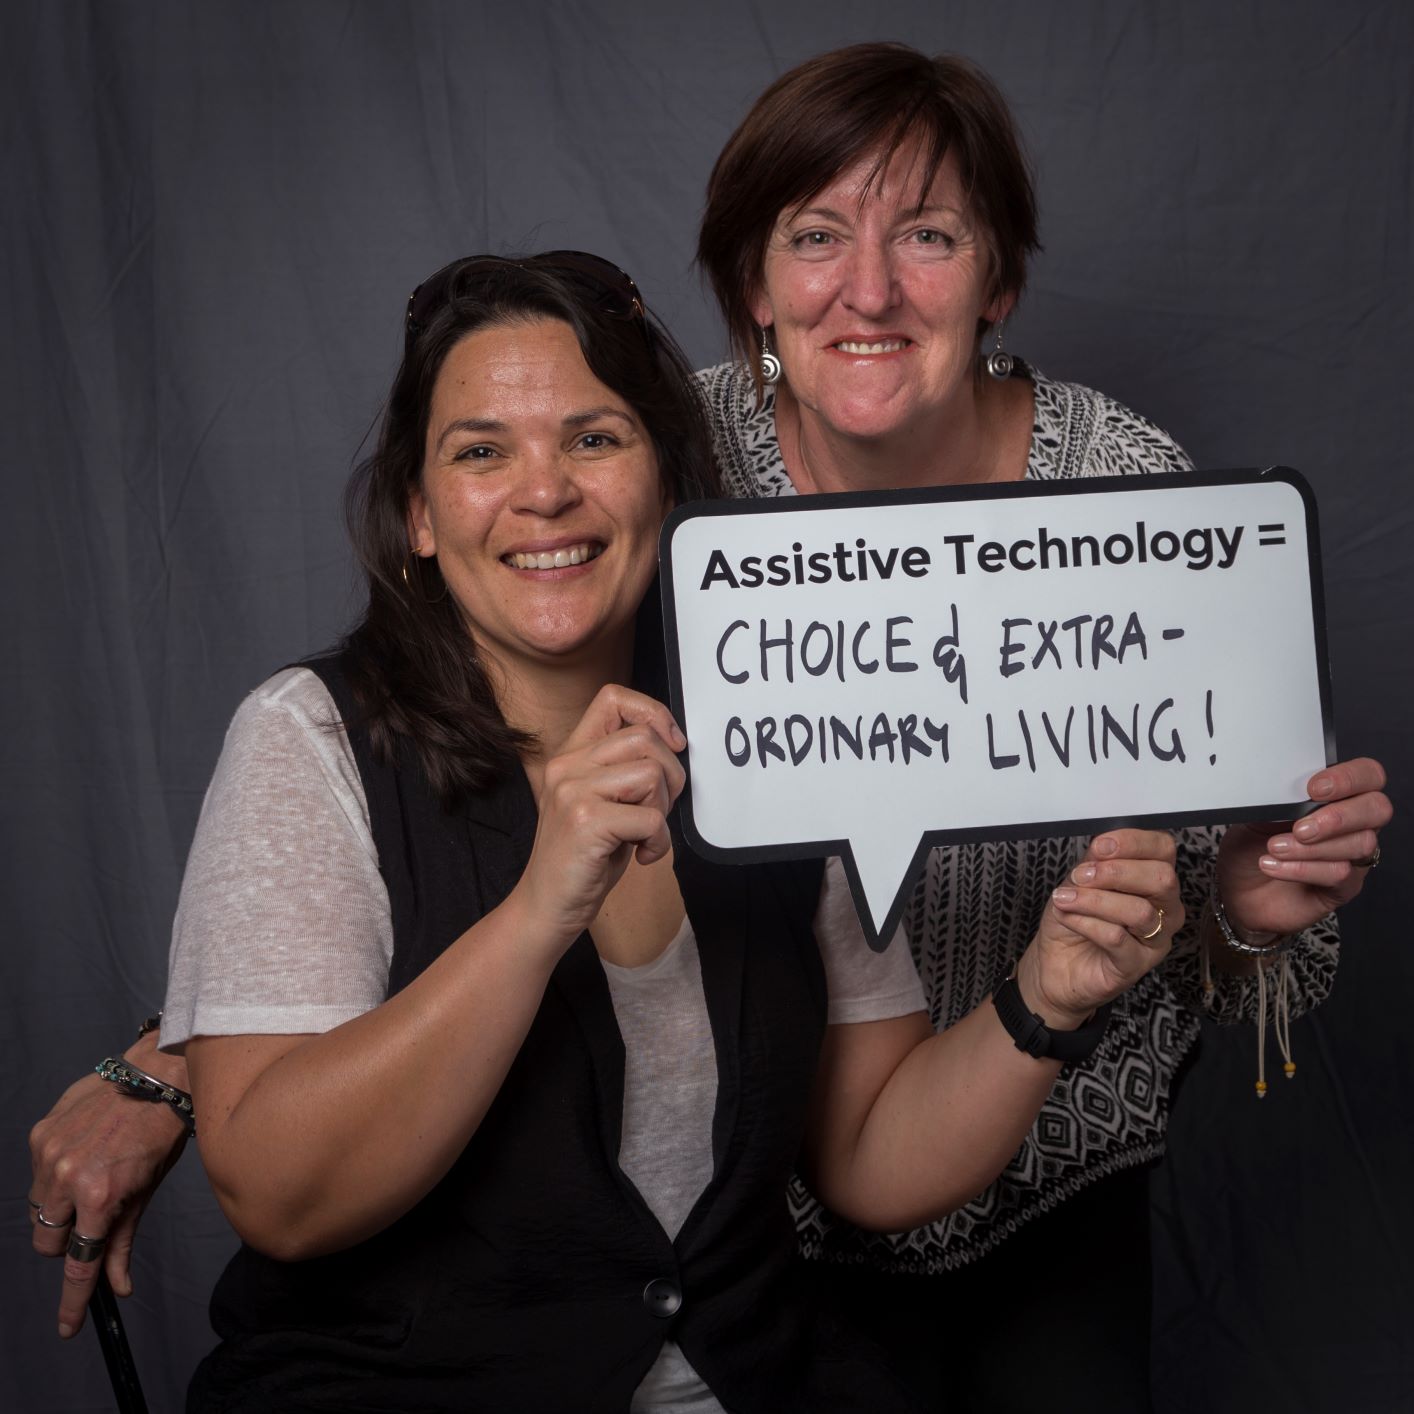 two woman holding up a speech bubble sign that reads assistive technology = choice and extra ordinary living